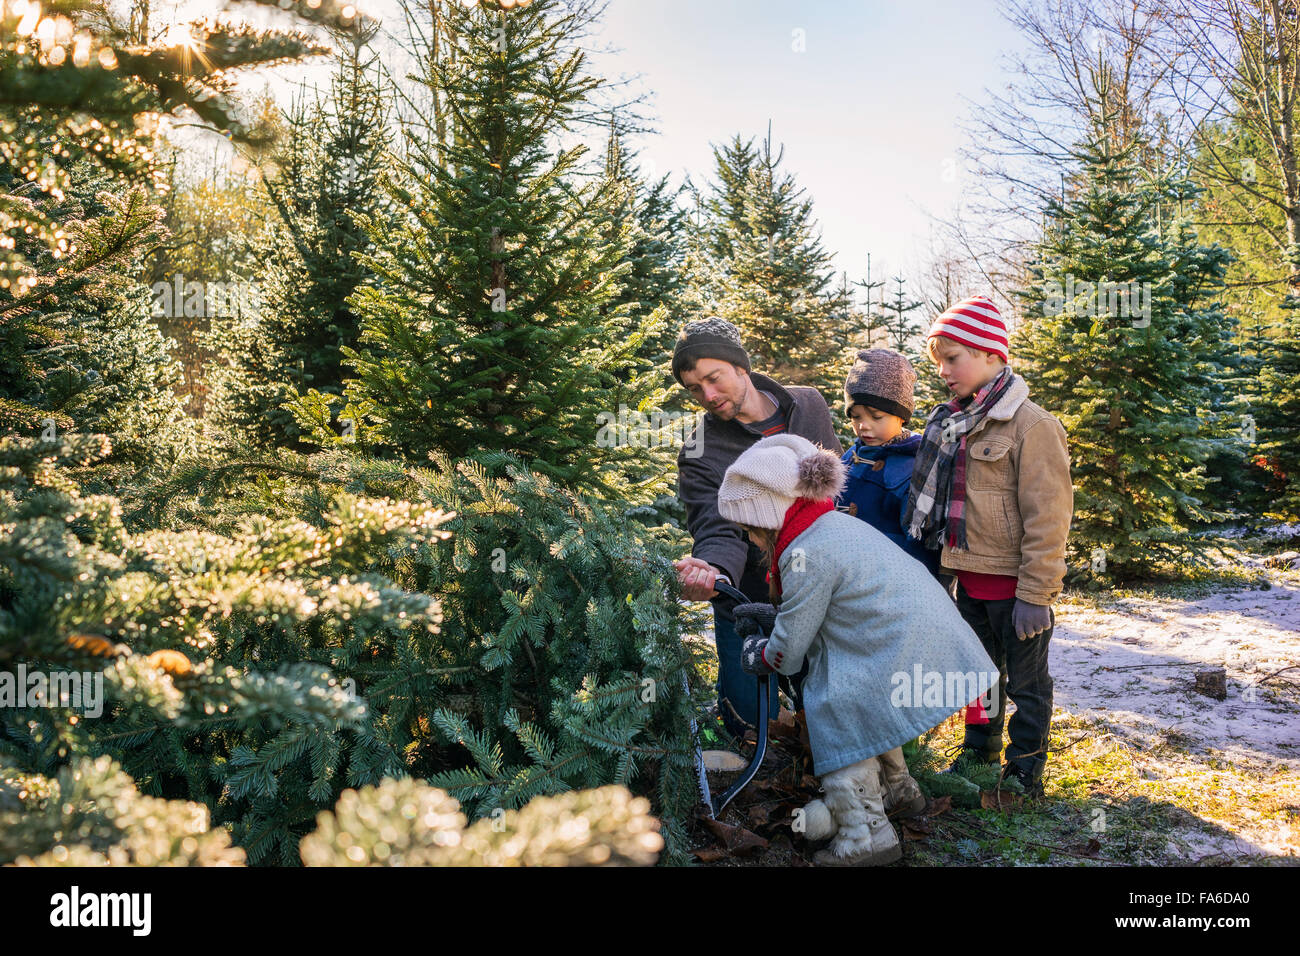 Father with three children cutting down Christmas tree Stock Photo